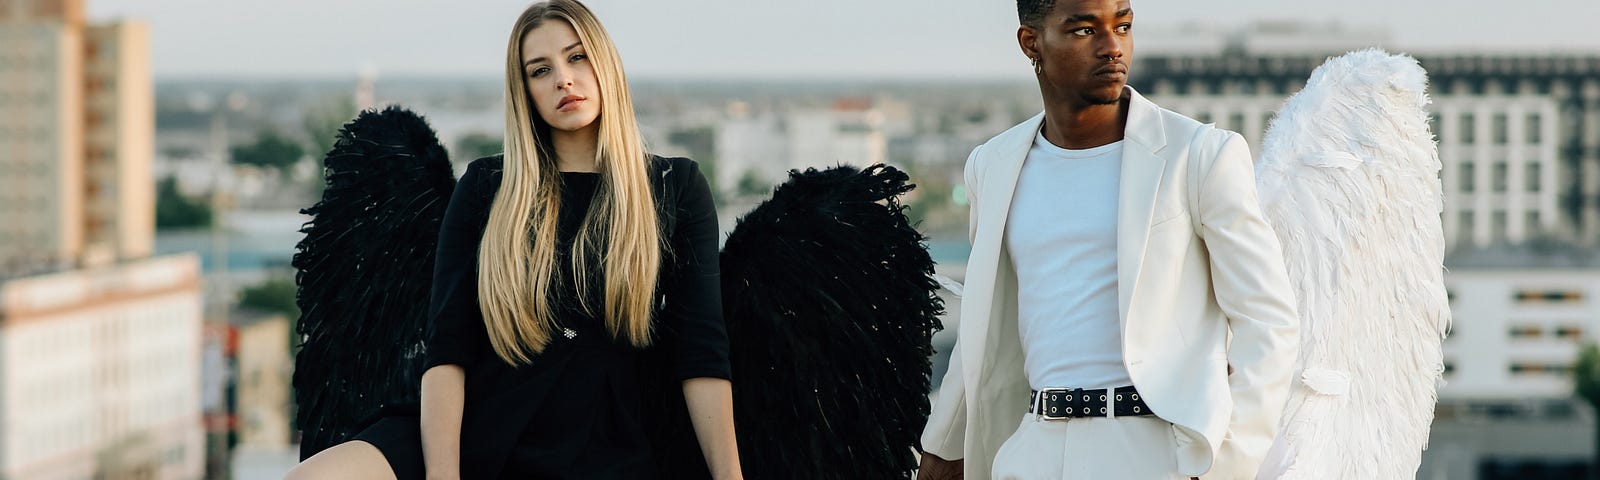 A white woman in a black angel costume and a Black man in a white angel costume hang out on a rooftop somewhere in a city. The woman looks straight at the camera. The man gazes to the side, into the distance.